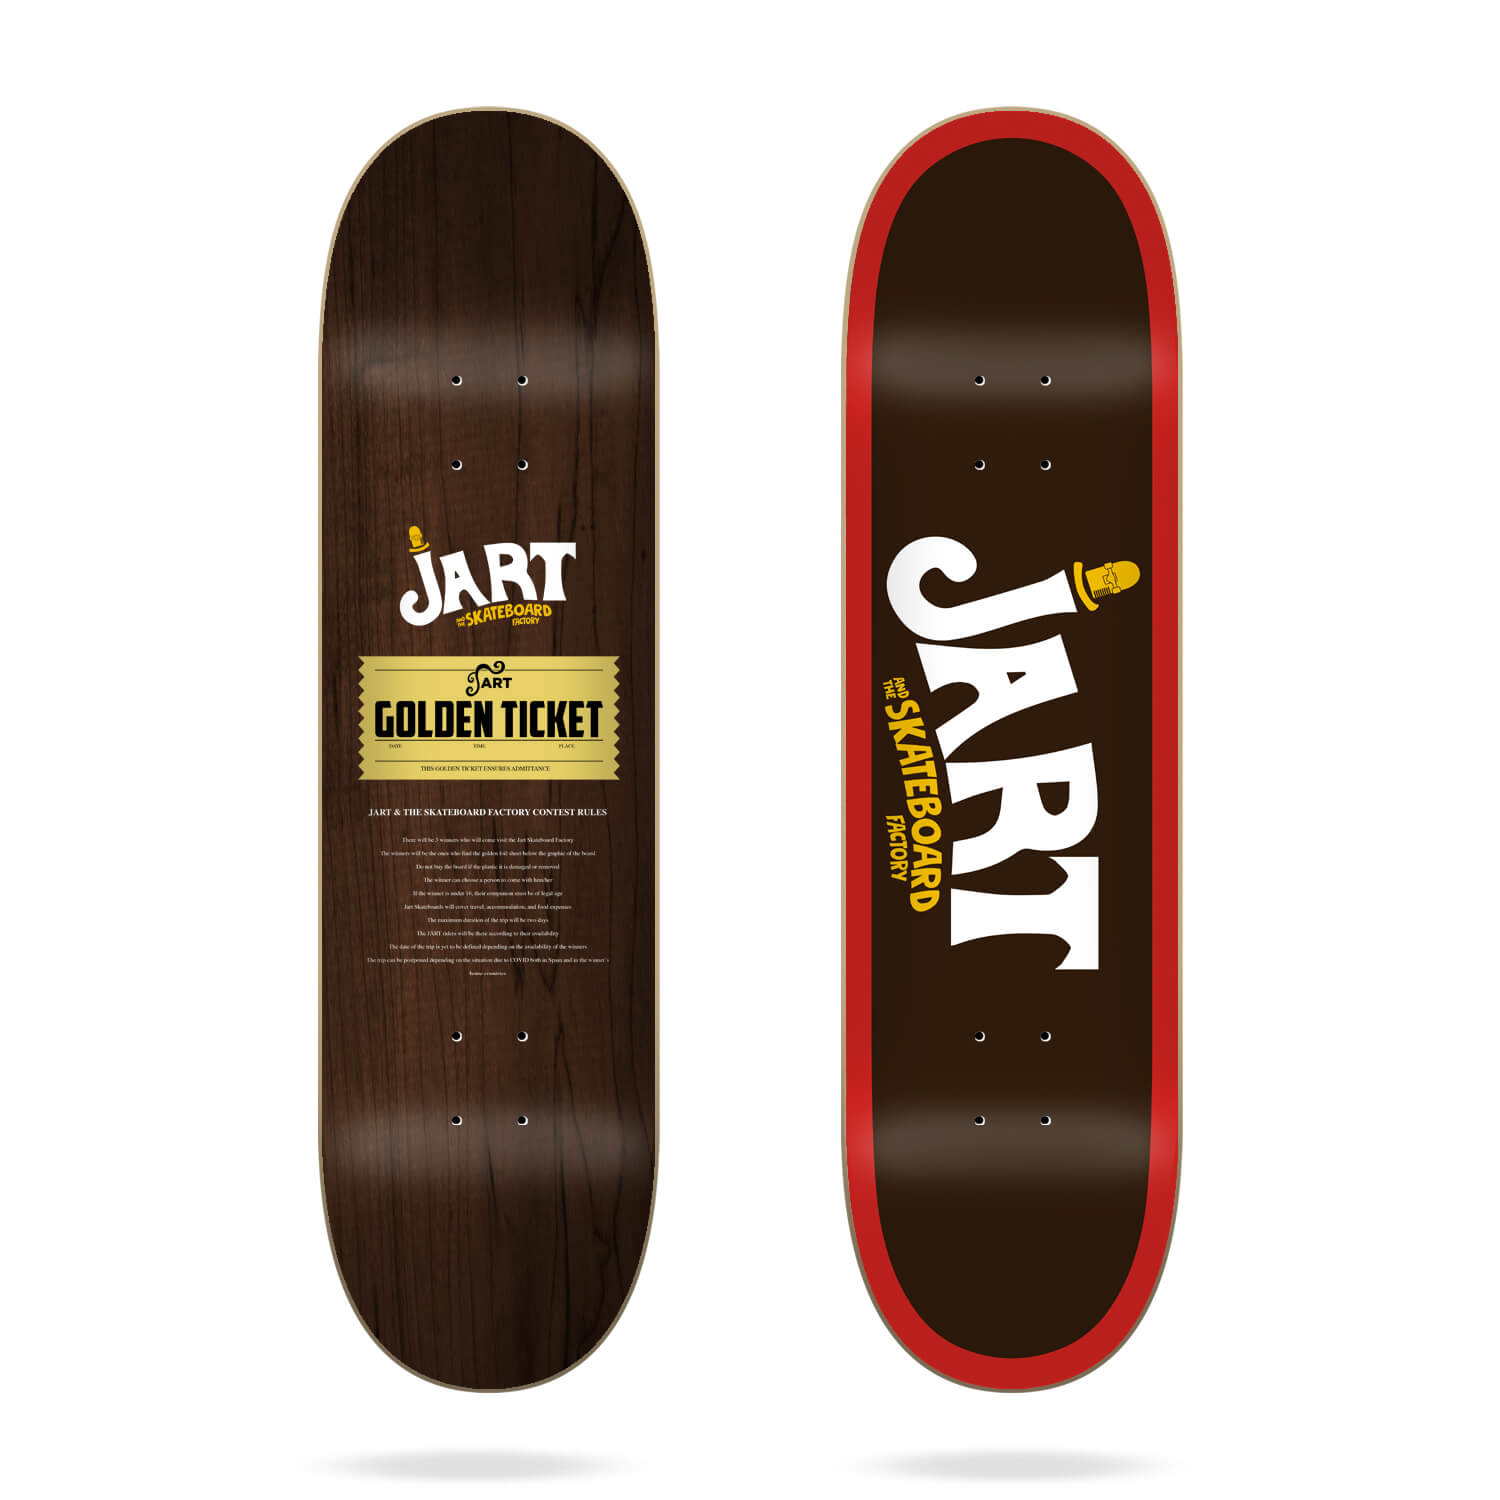 Jart And The Skateboard Factory 8.0" deck